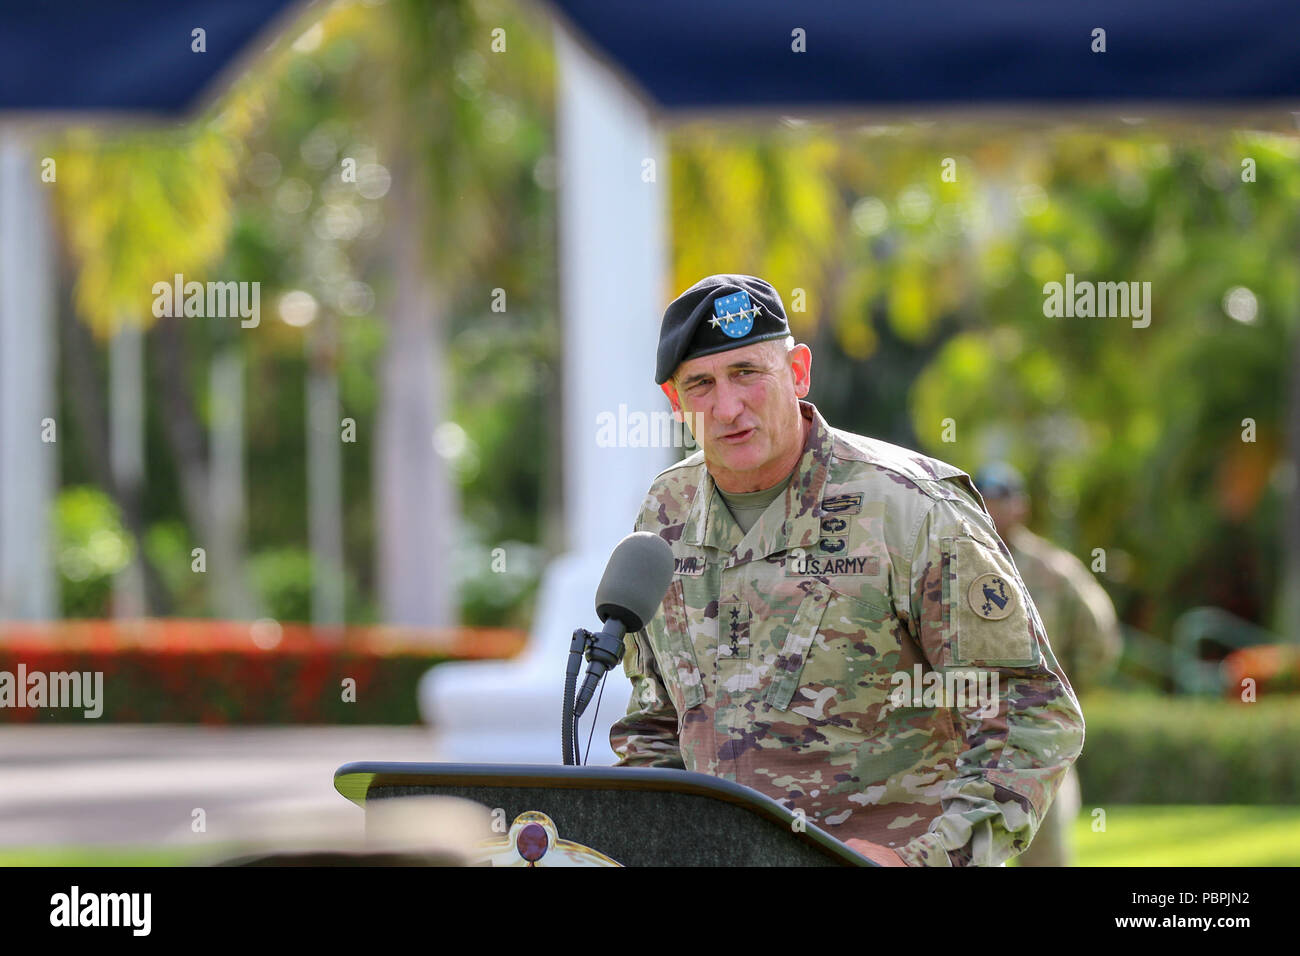 U.S. Army Gen. Robert B. Brown, the commander of the U.S. Army Pacific, addresses attendees to Brig. Gen. Sean Gainey and Brig. Gen. Michael Morrissey’s, the outgoing and incoming 94th Army Air and Missile Defense, at the change of command ceremony, July 26, 2018, historic Palm Circle lawn at Fort Shafter, Hawaii. Stock Photo